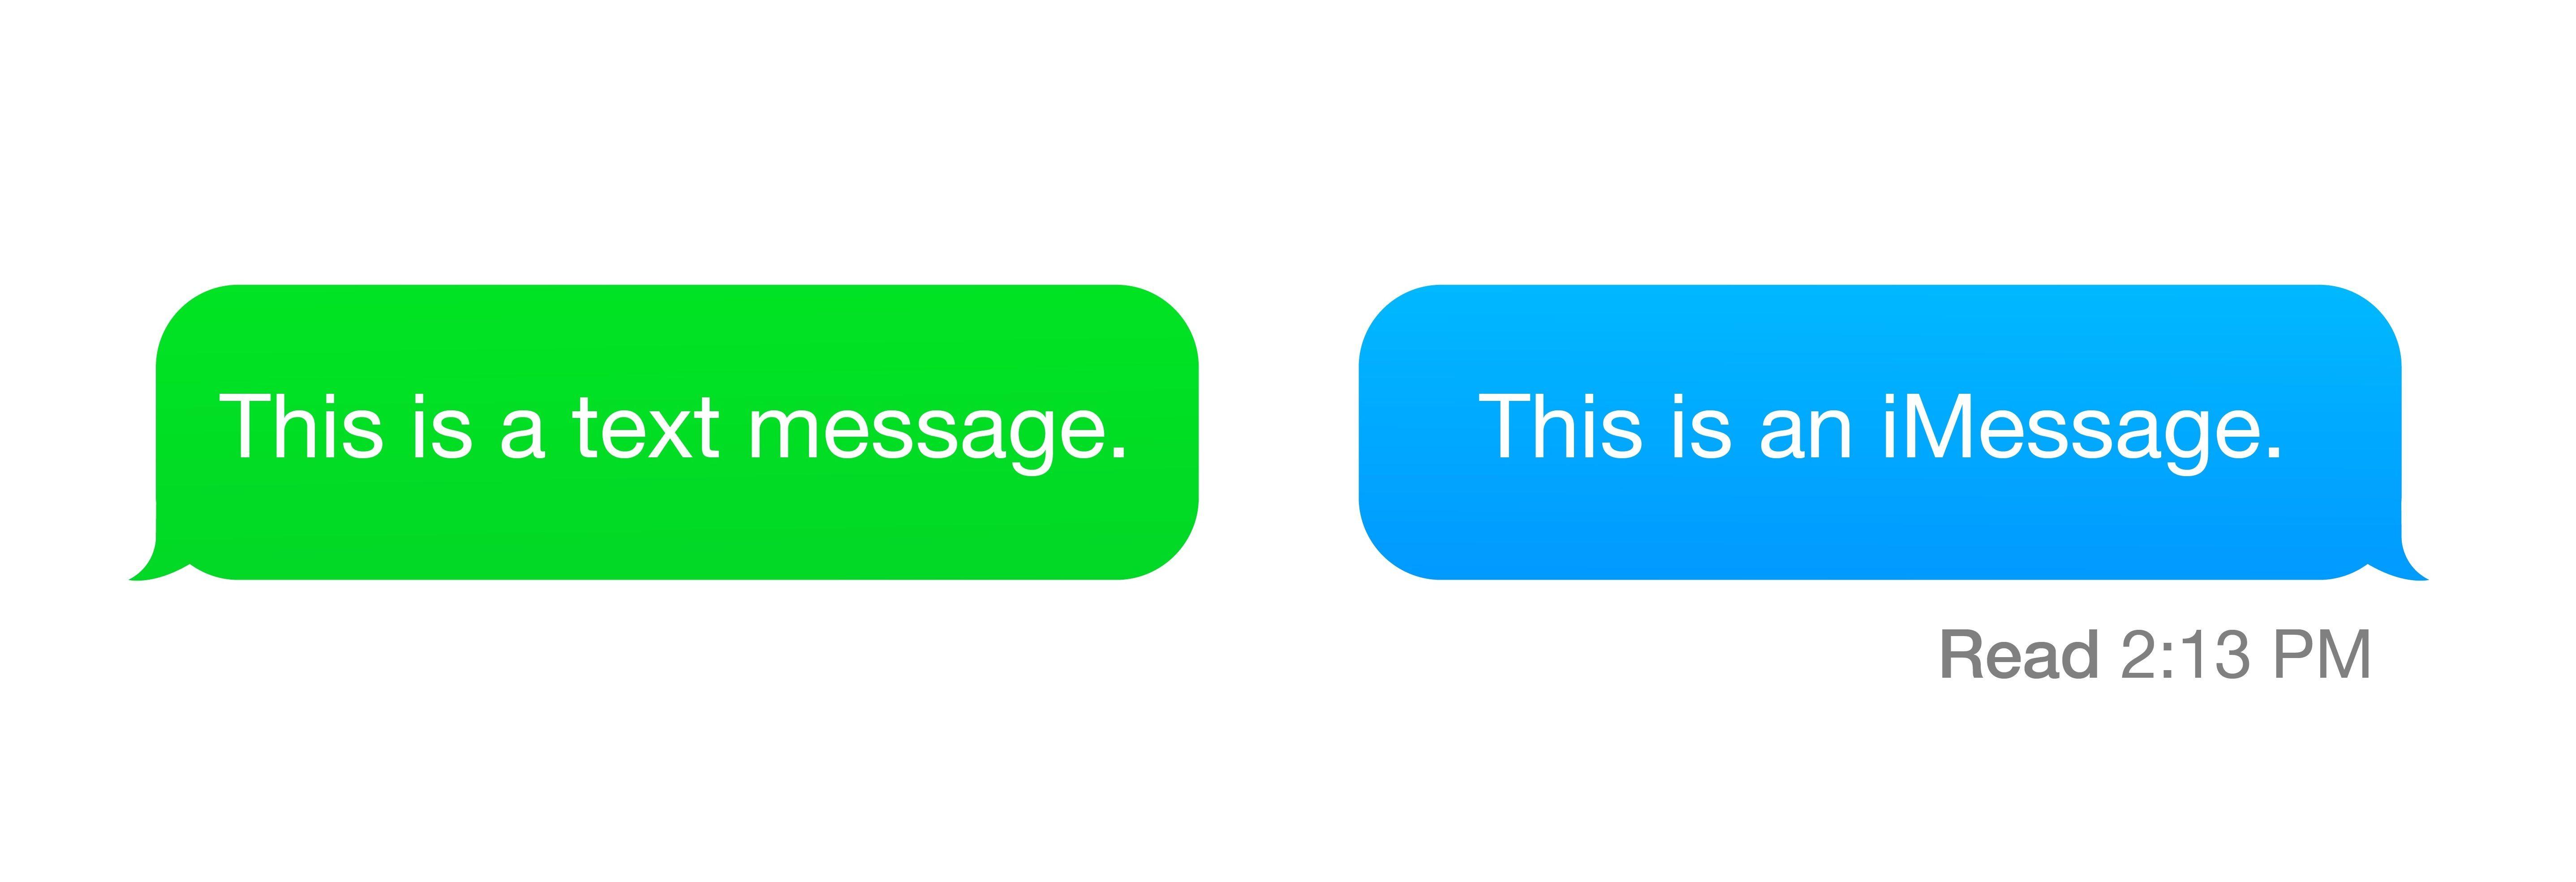 Green Message Bubble Logo - Ugh, Green Bubbles! Apple's iMessage Makes Switching to Android Hard